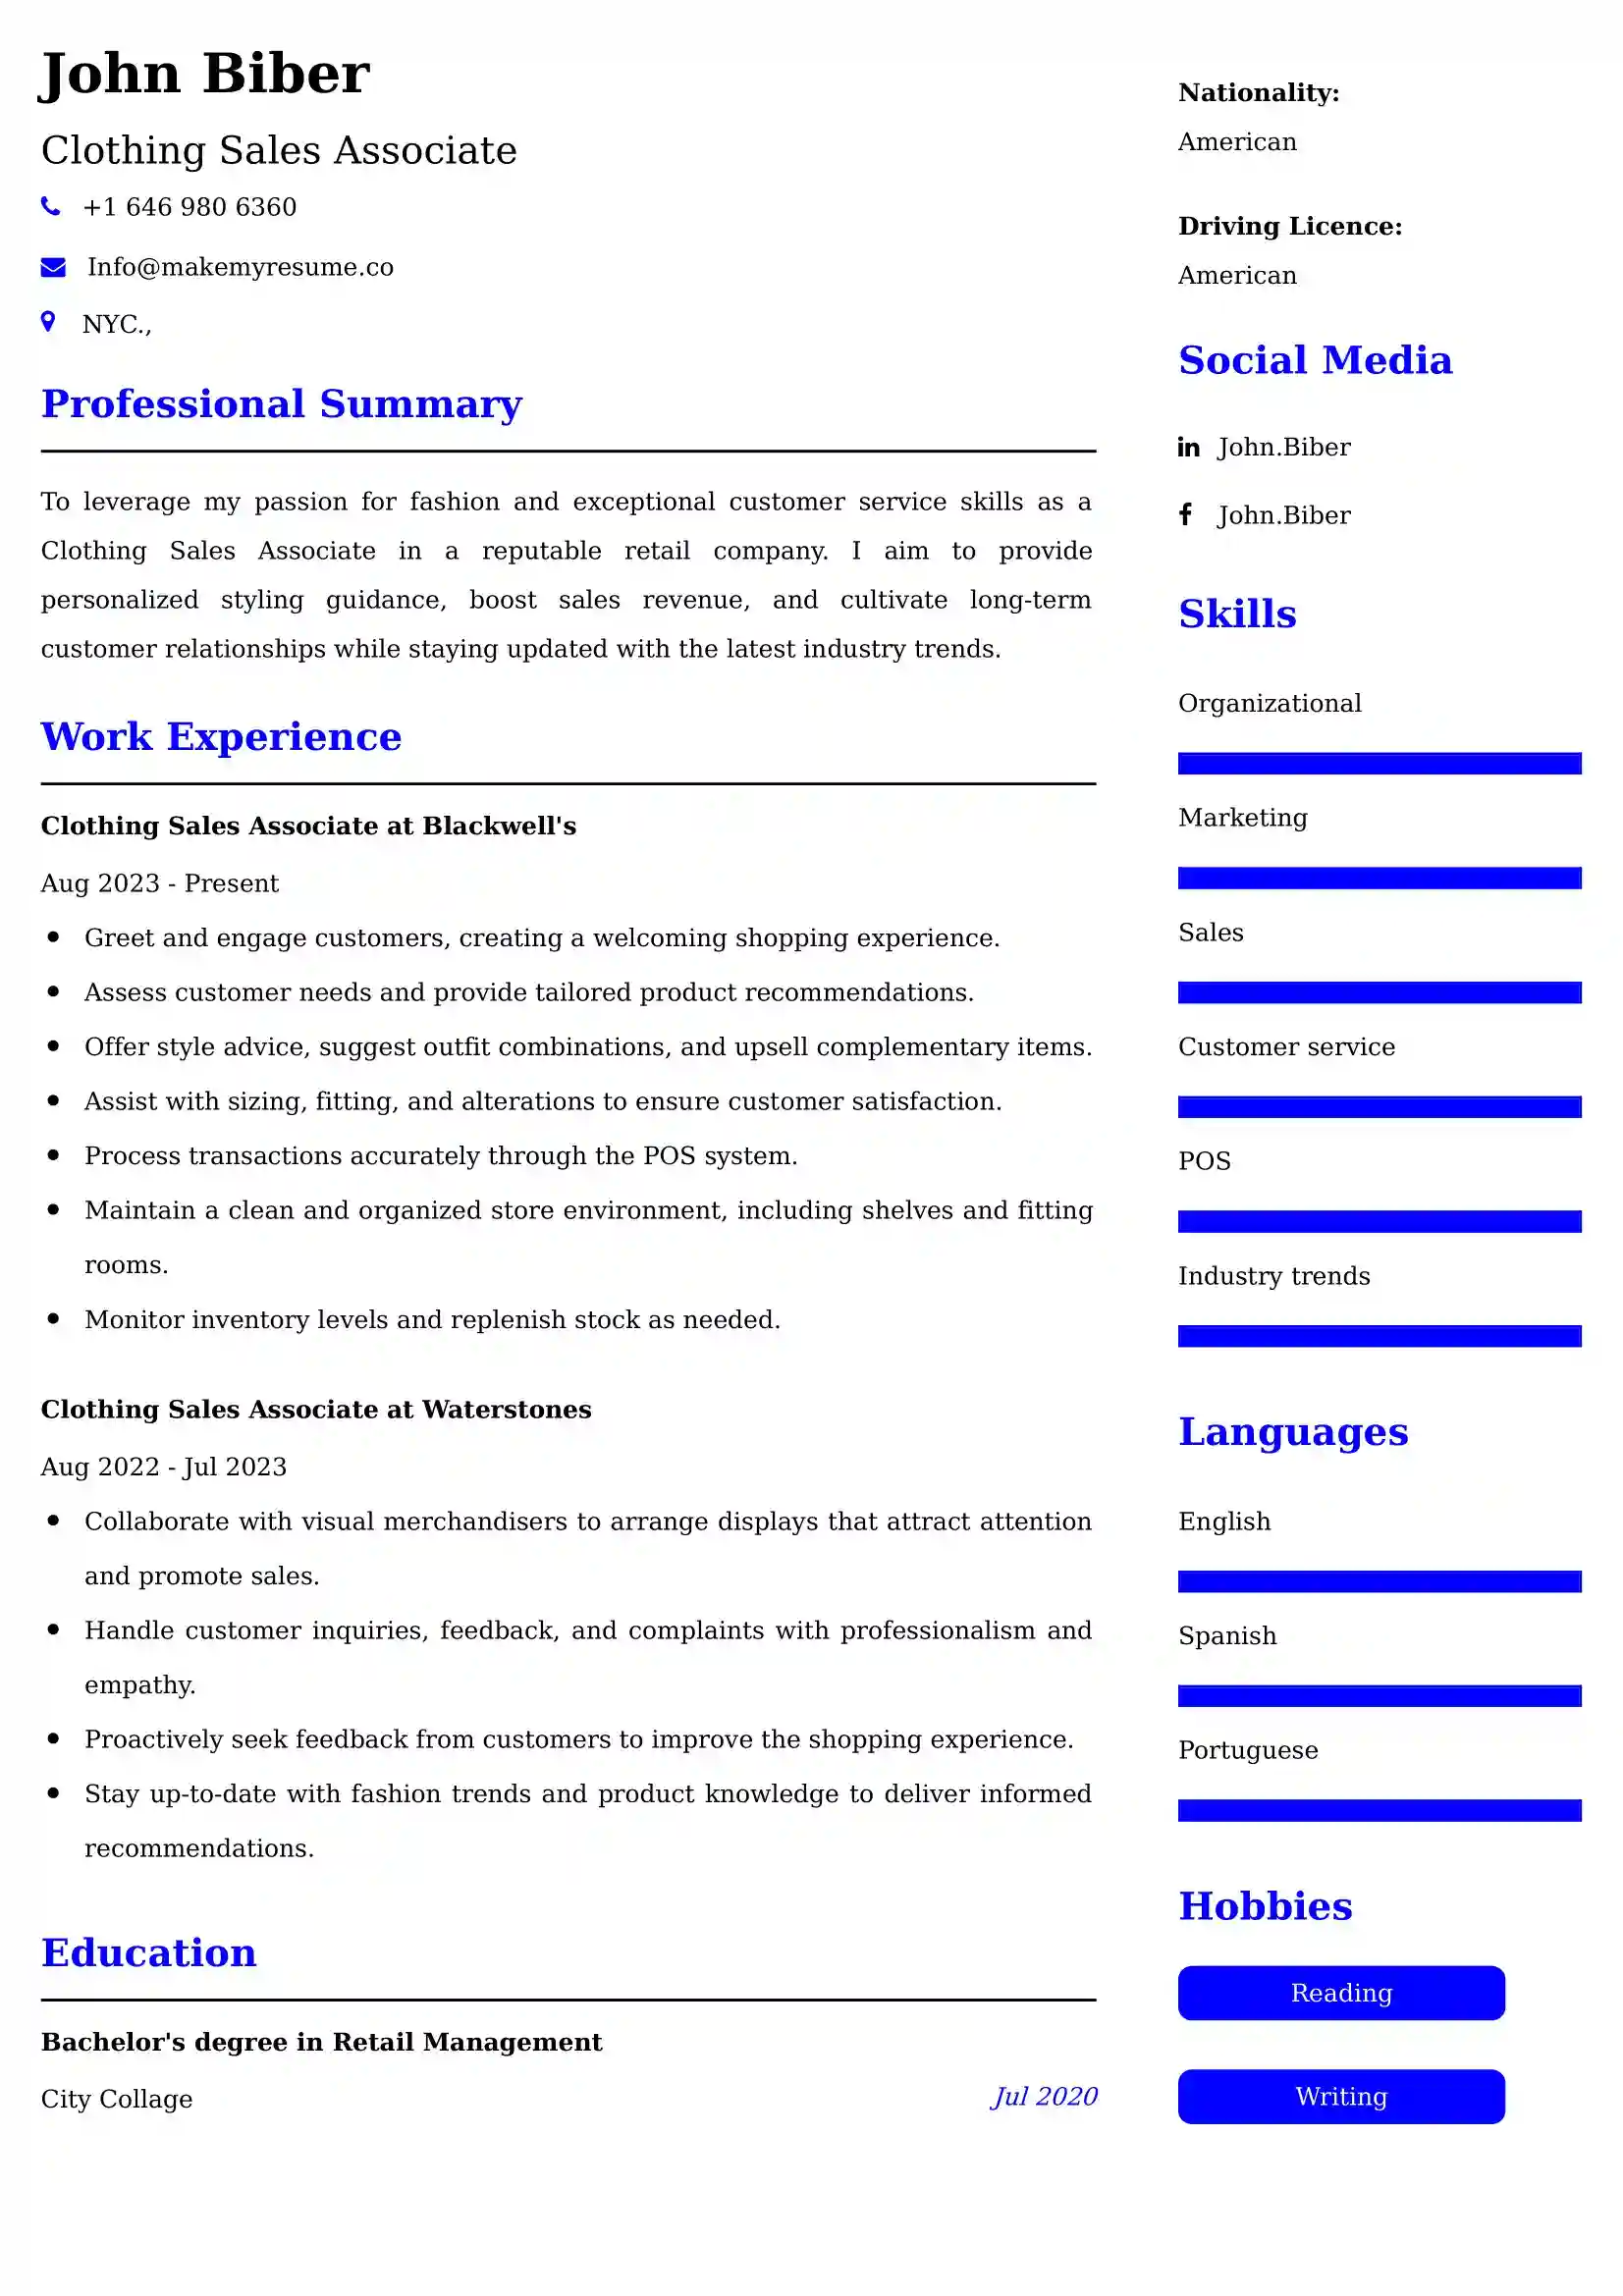 Clothing Sales Associate Resume Examples for UK Jobs - Tips and Guide